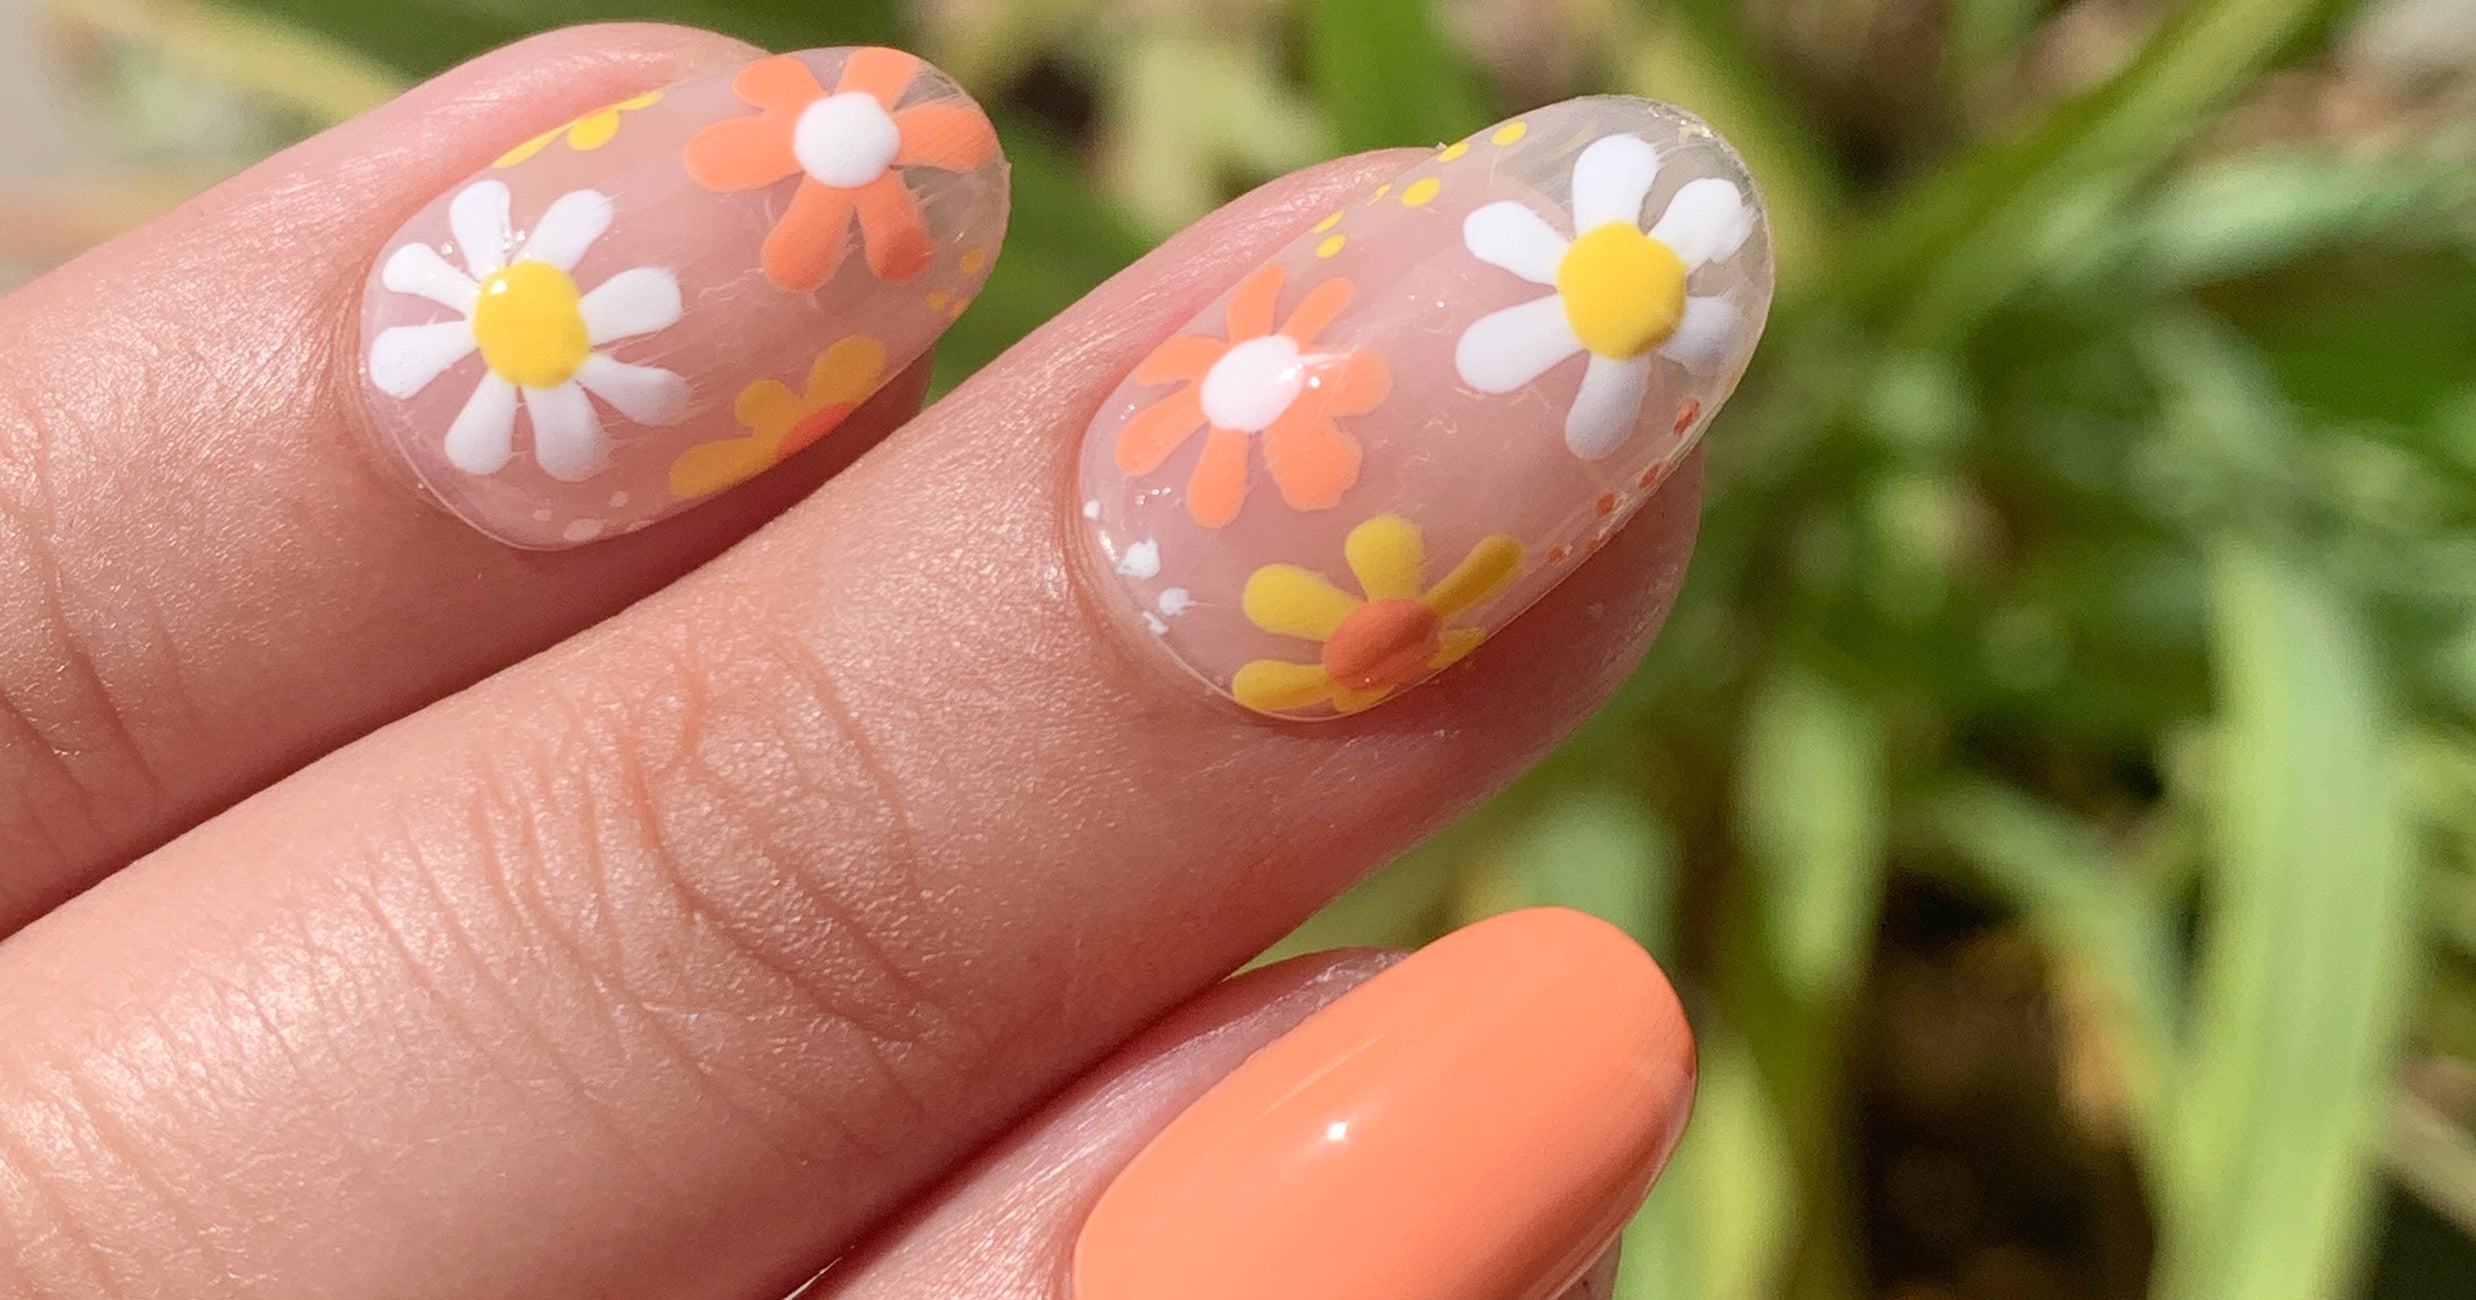 2. Simple Nail Art Ideas for Short Nails - wide 3